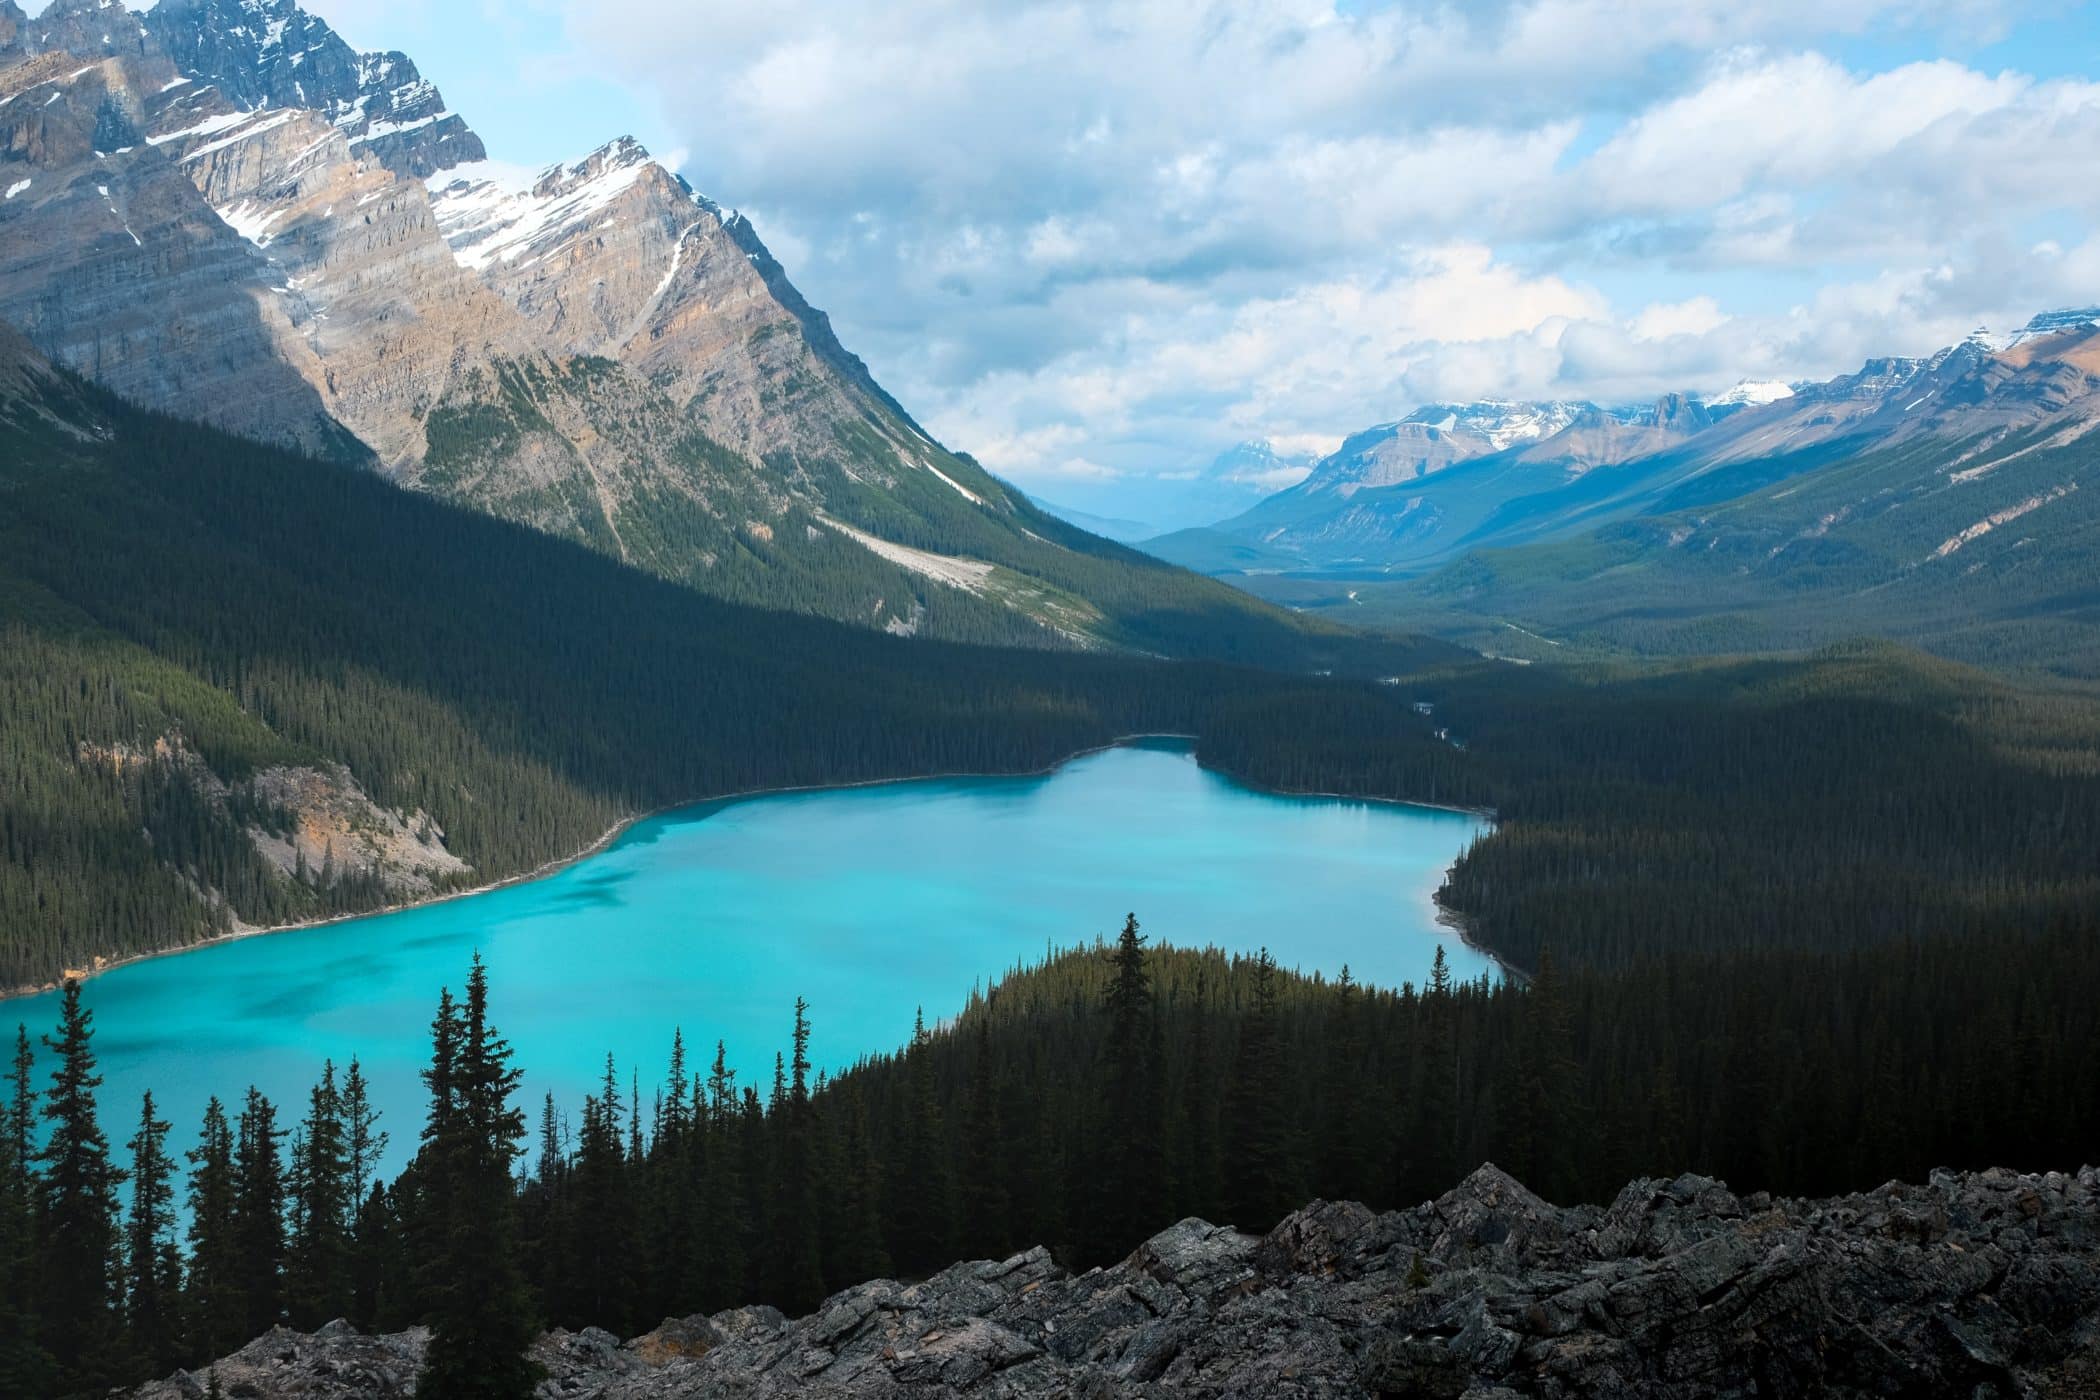 Peyto Lake day hike in Banff National Park, Canada